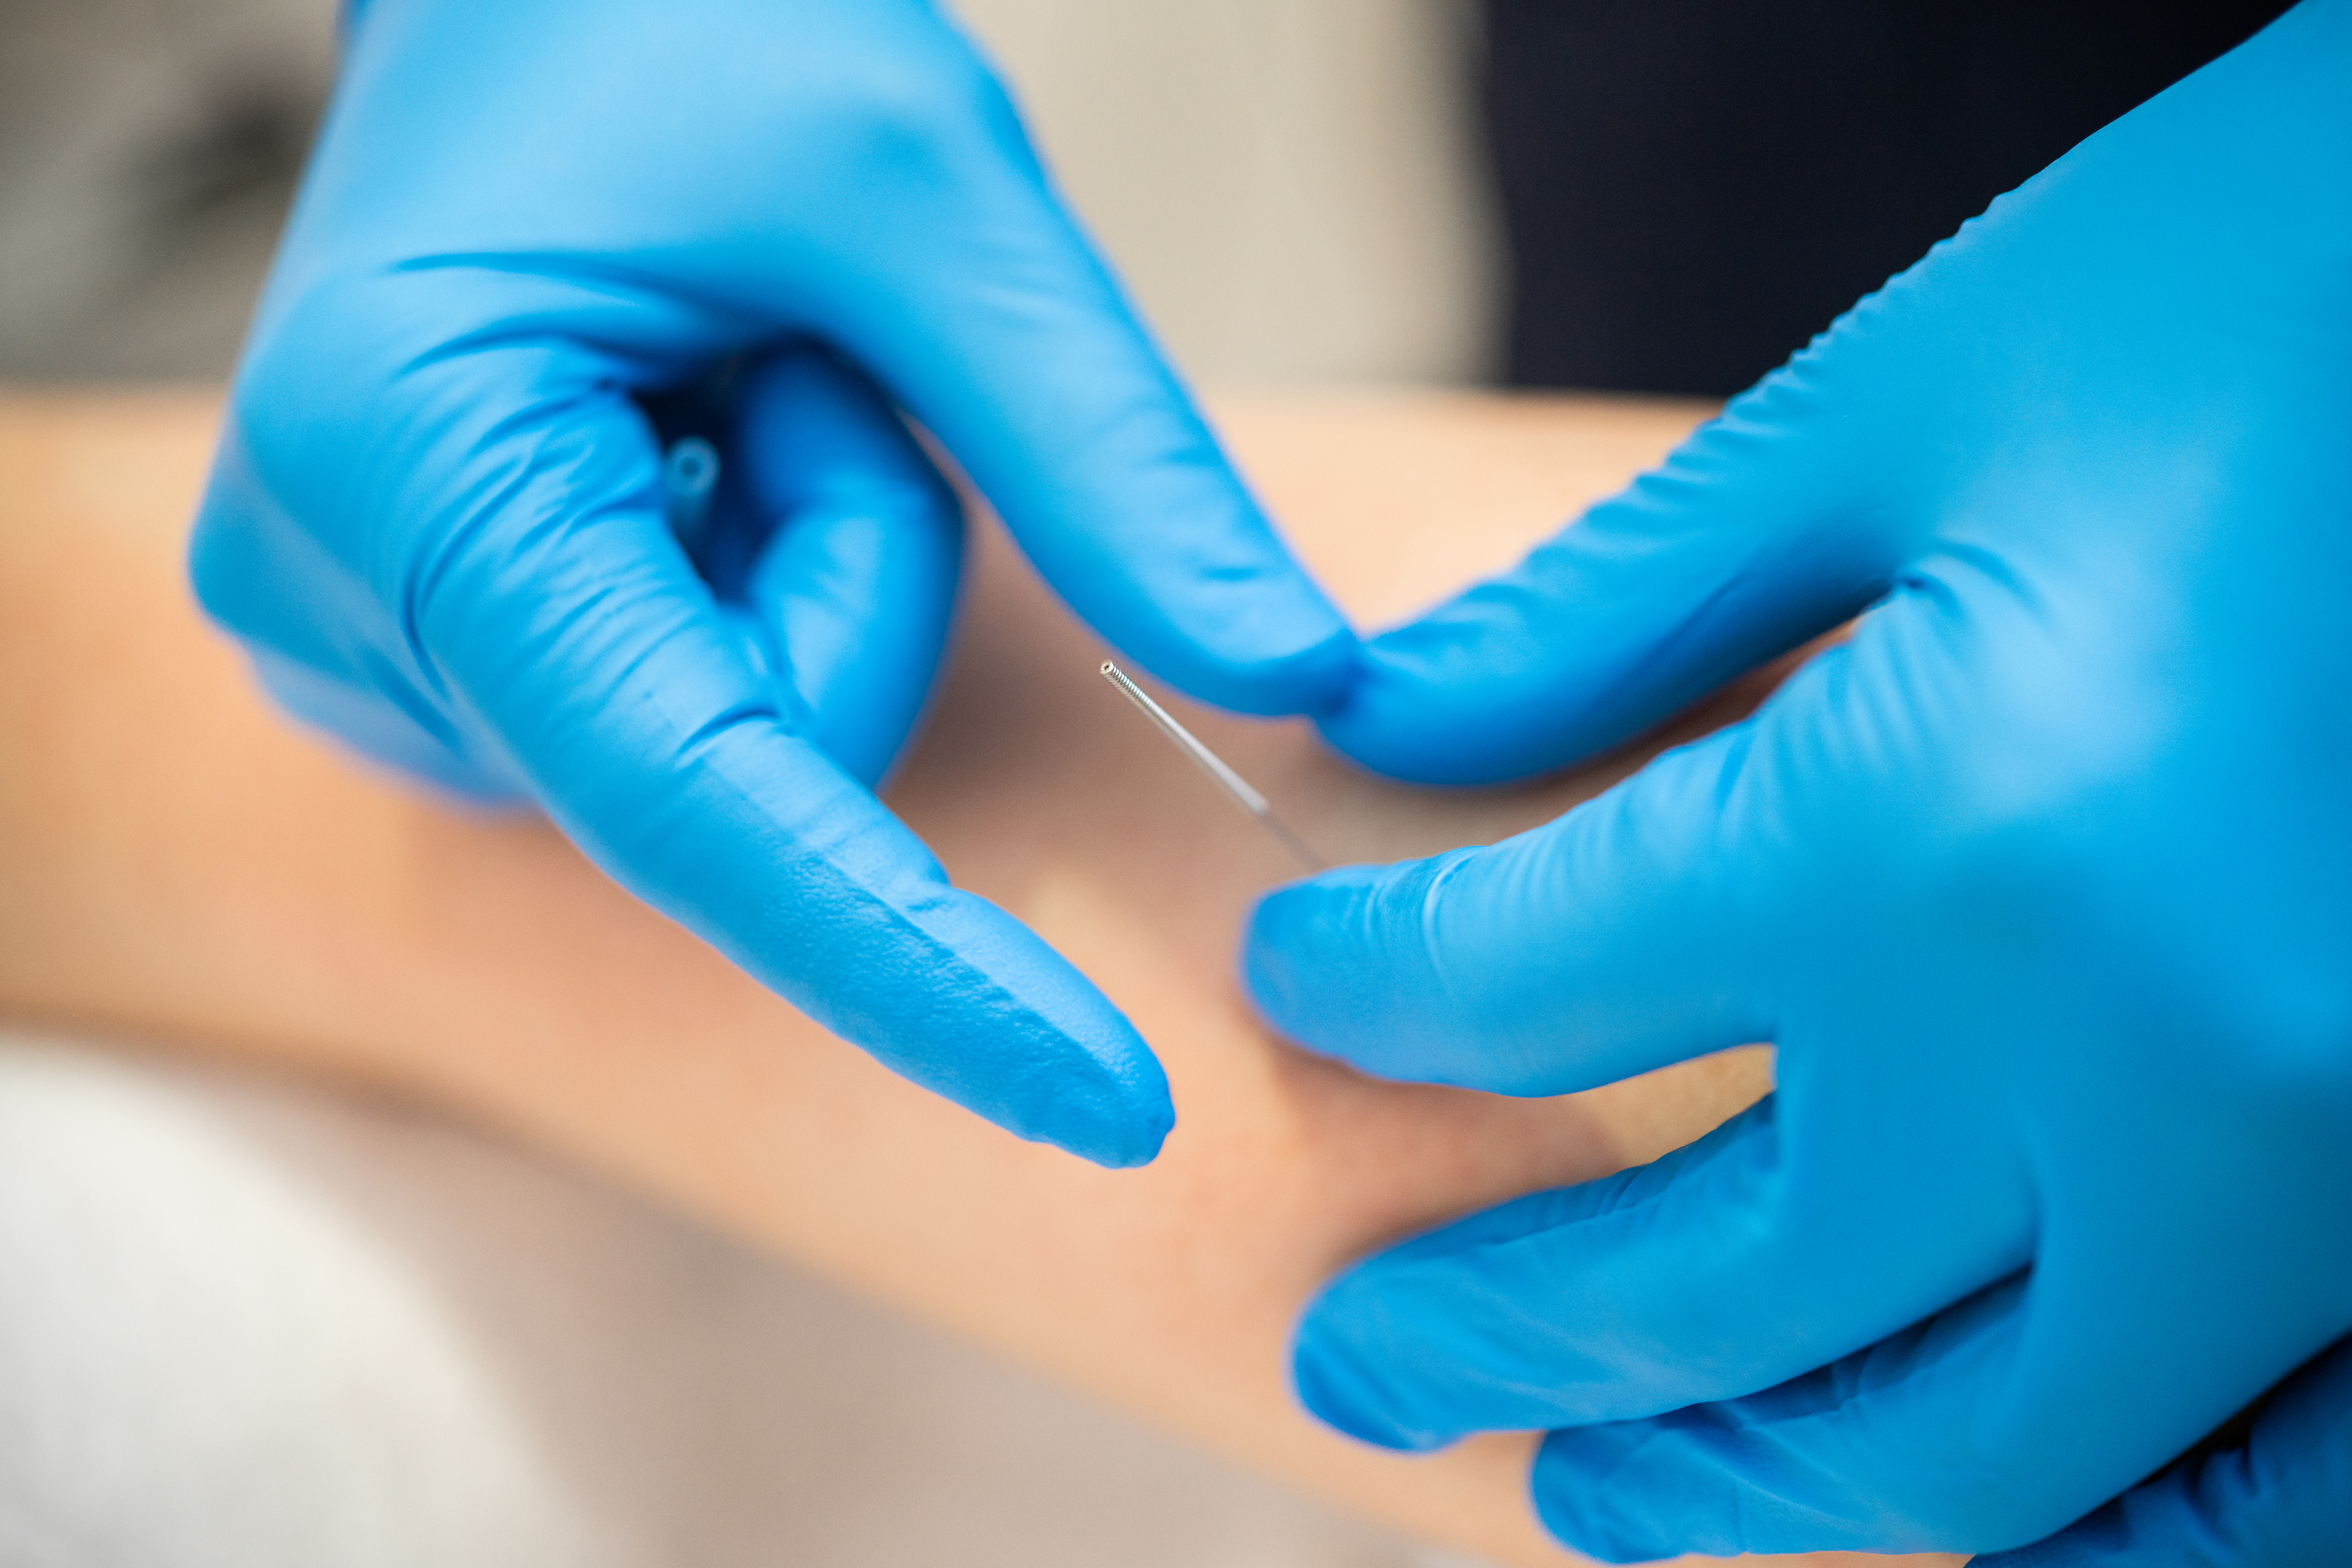 In this close-up photo, the gloved hands of a physical therapist adjusts a needle in a patient's leg during a dry needling session.